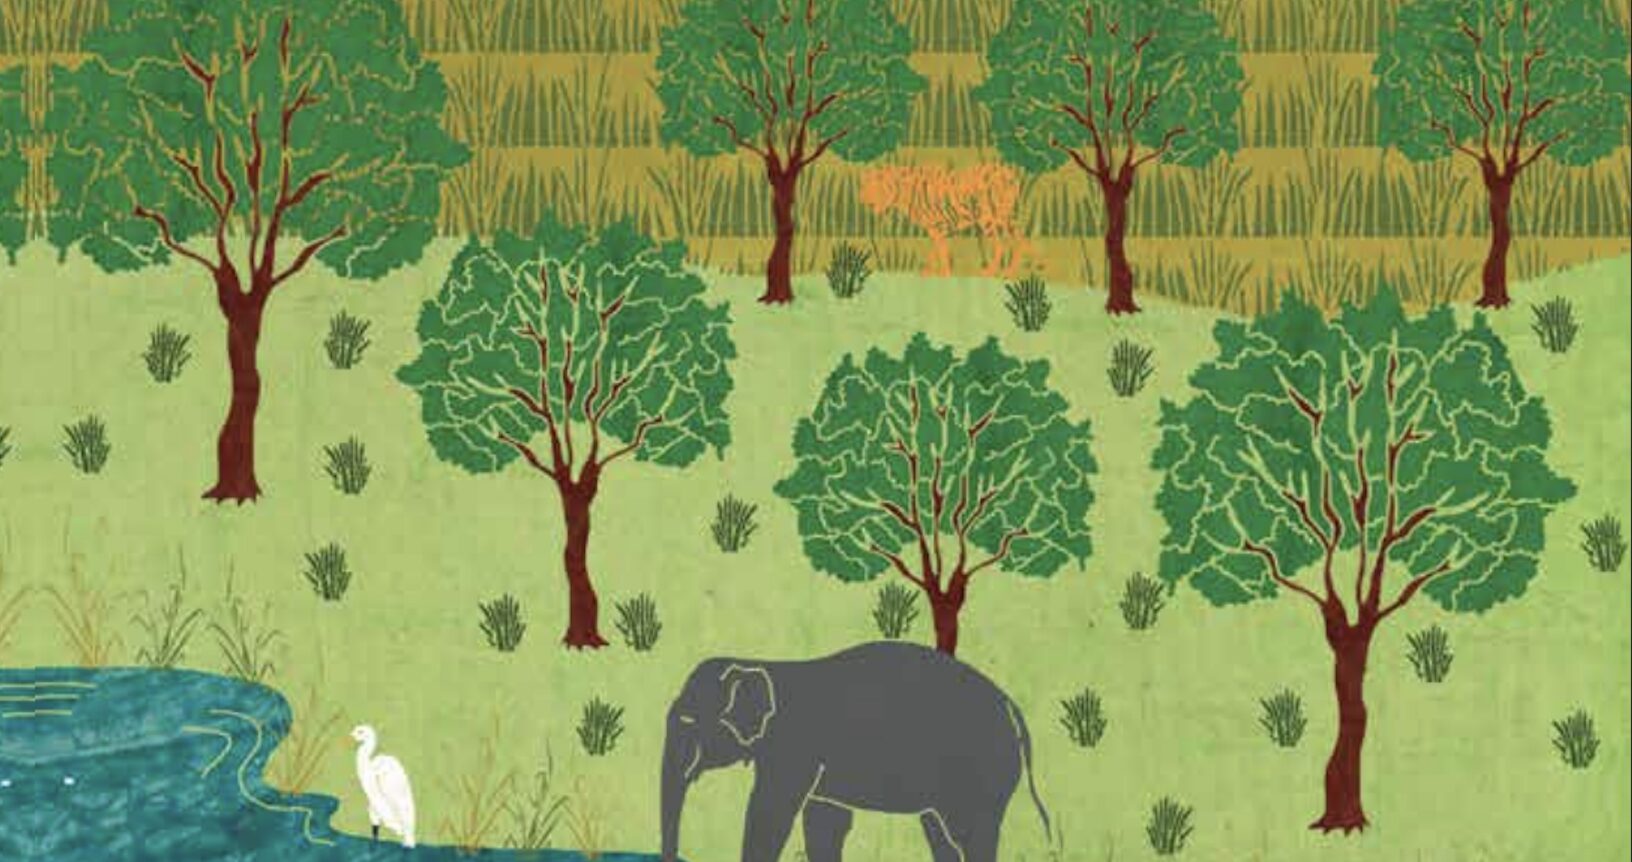 Illustrated image of an elephant and a crane bird in a green landscape full of tall grass and trees